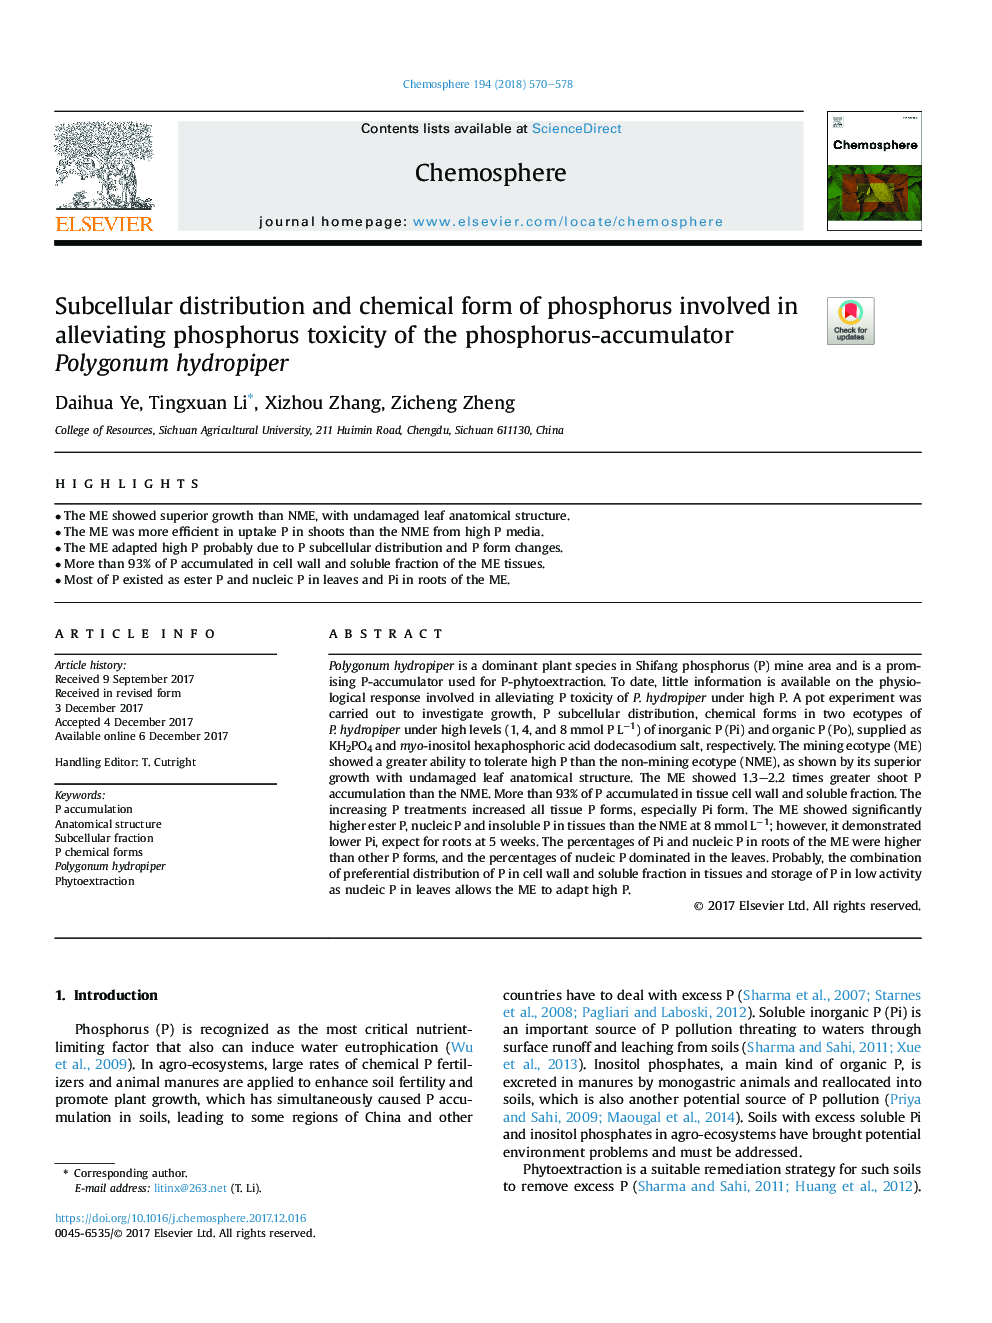 Subcellular distribution and chemical form of phosphorus involved in alleviating phosphorus toxicity of the phosphorus-accumulator Polygonum hydropiper